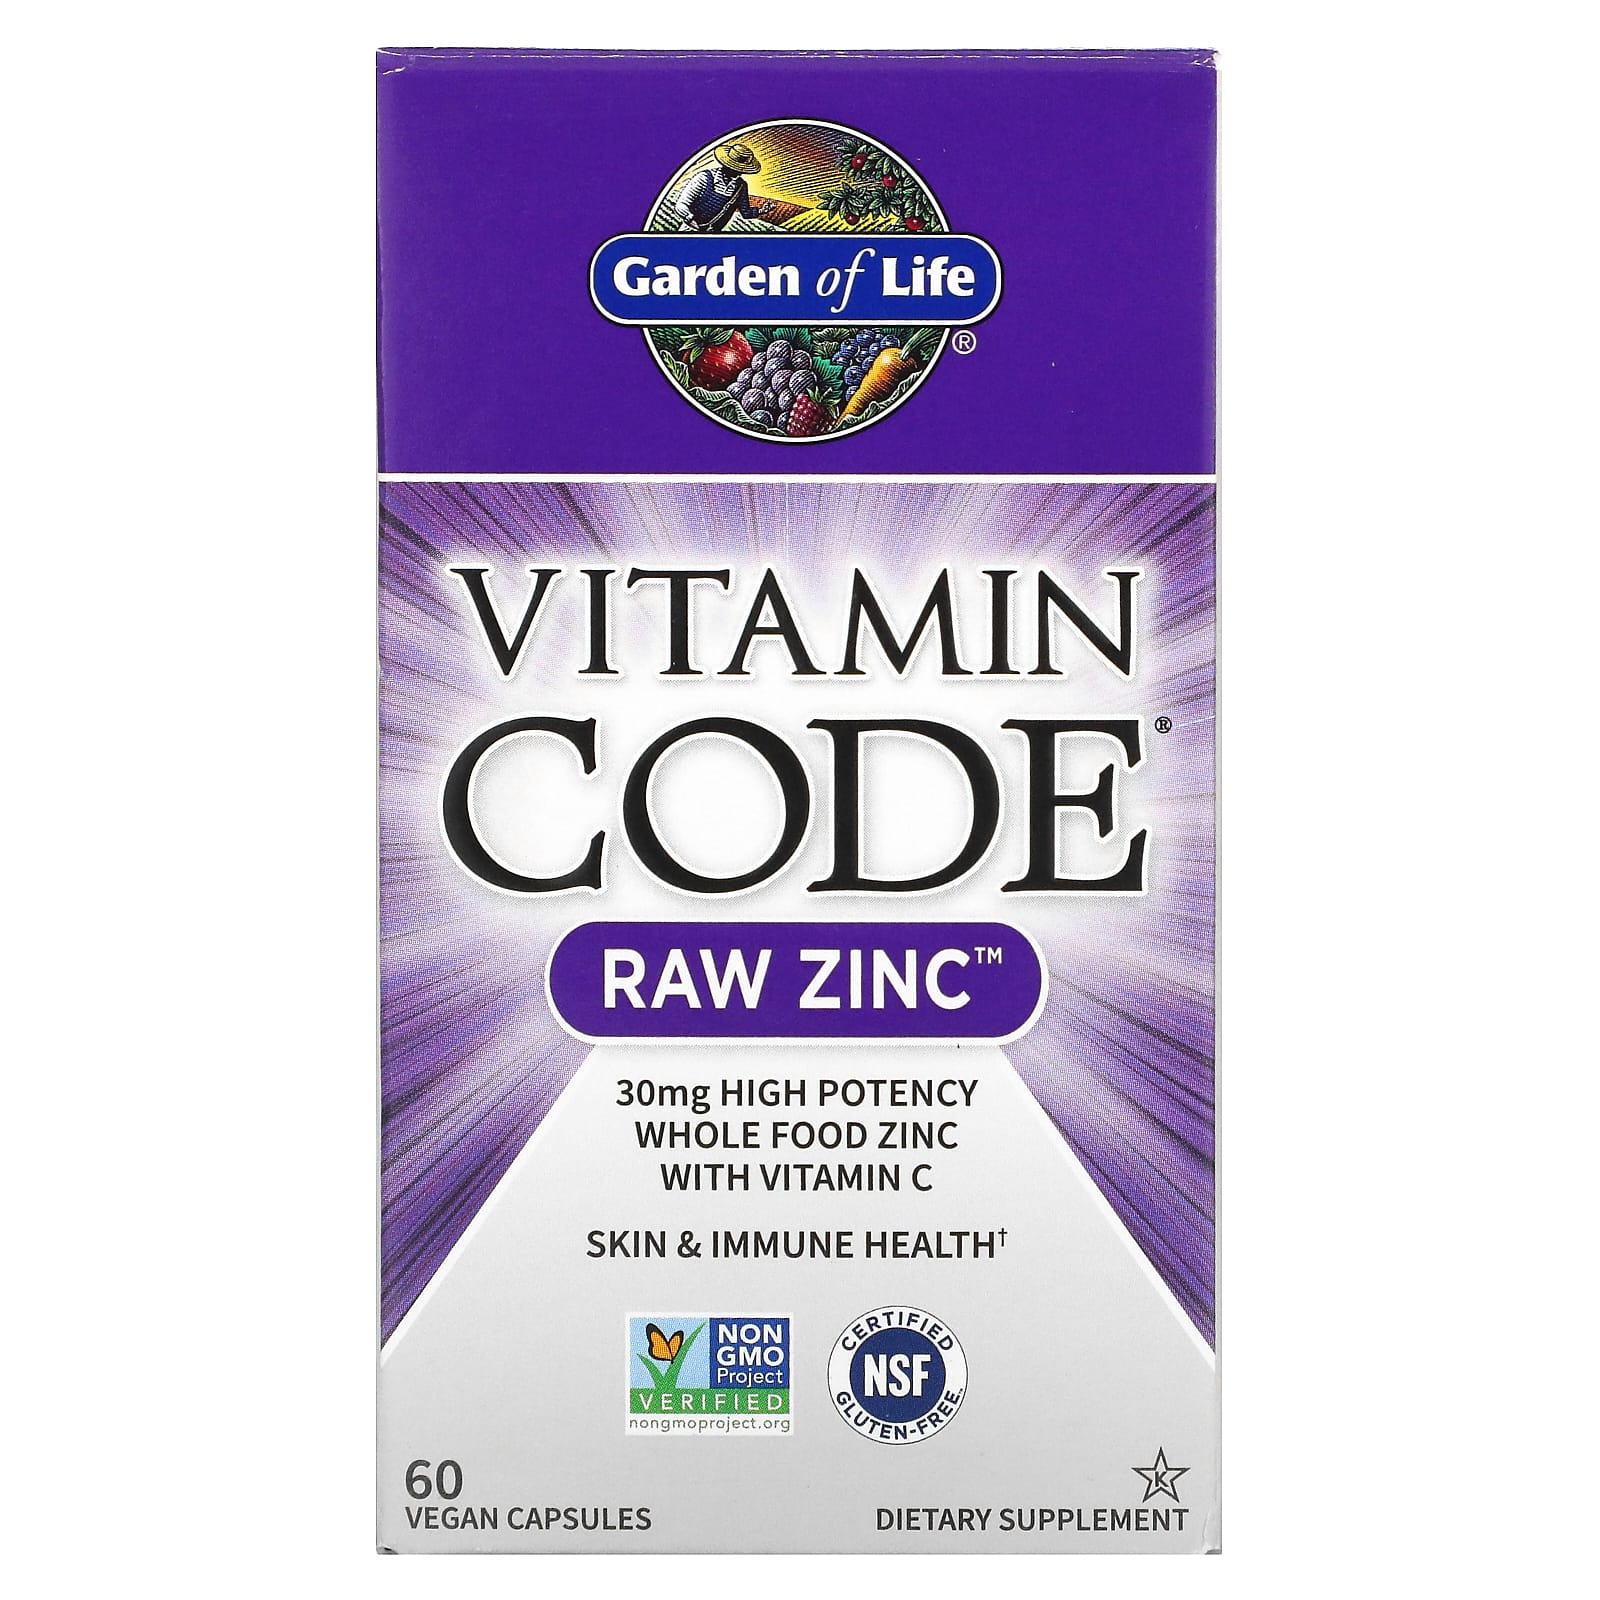 iherb offer code Is Essential For Your Success. Read This To Find Out Why